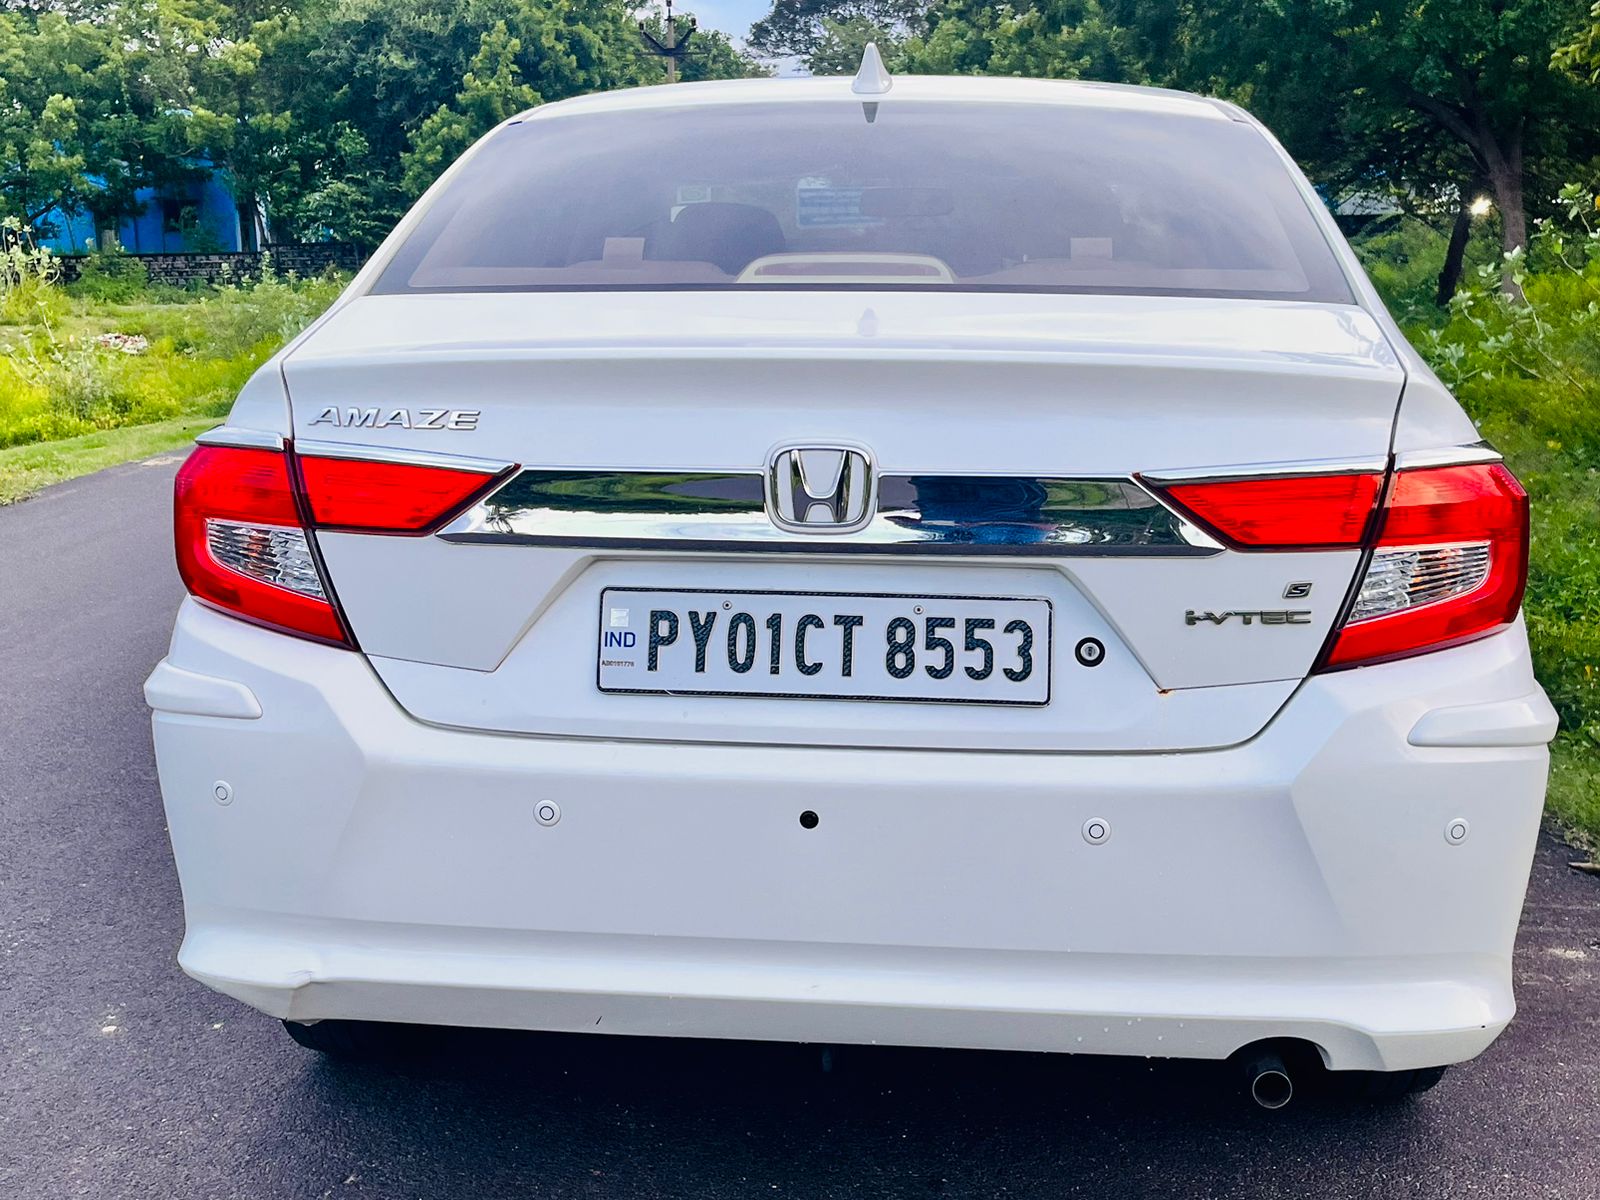 5145-for-sale-Honda-Amaze-Petrol-First-Owner-2018-PY-registered-rs-0